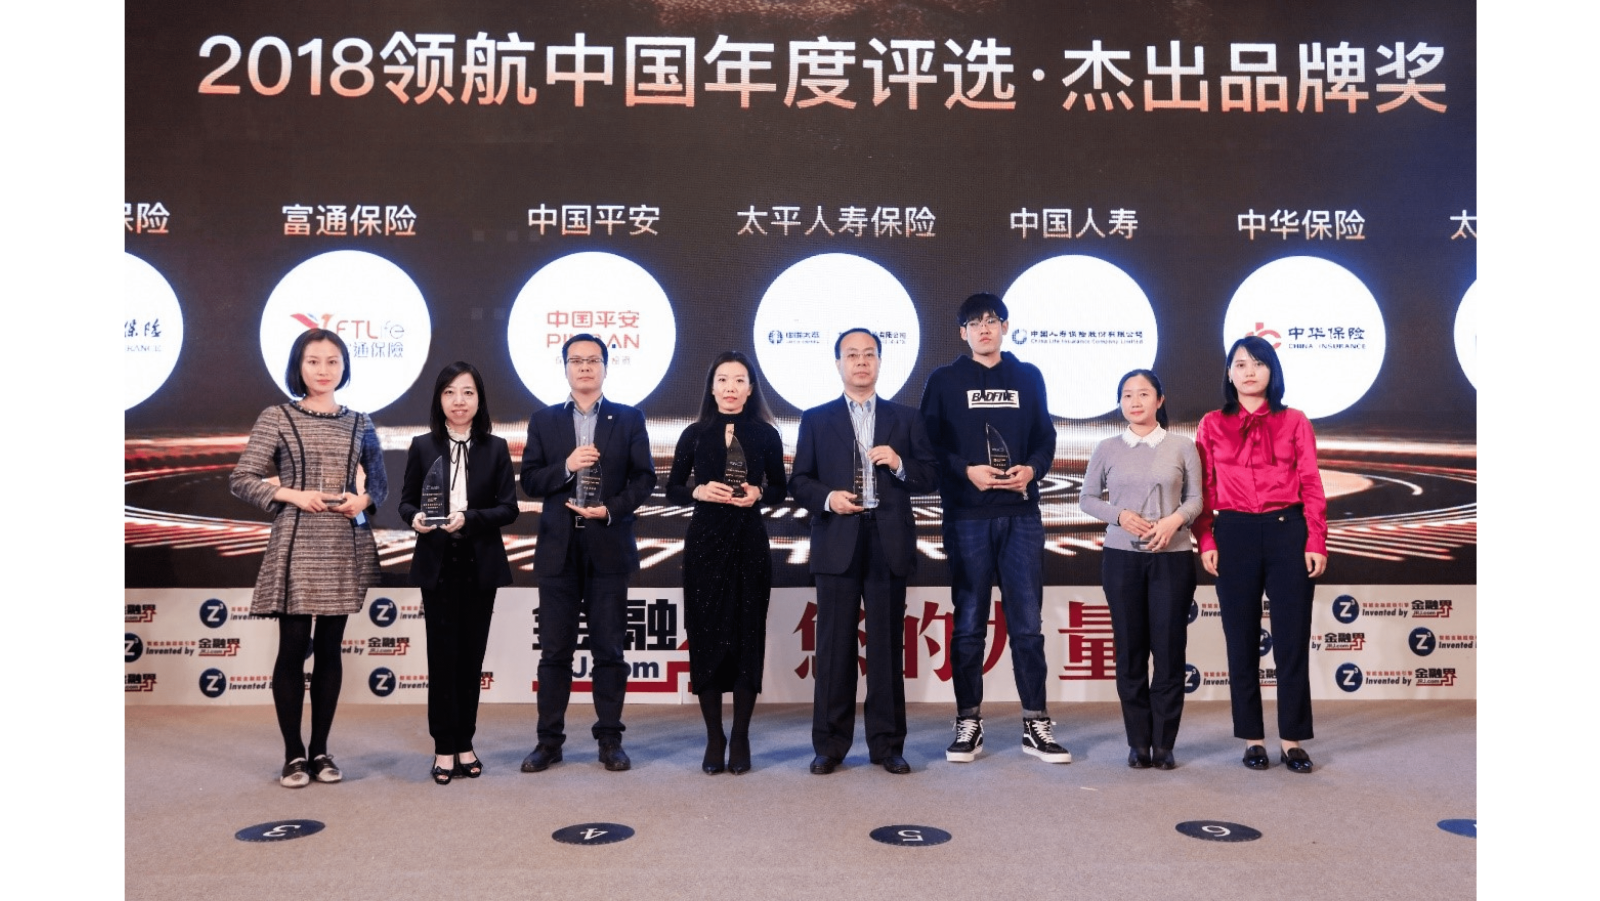 FTLife receives “Outstanding Hong Kong Insurance Brand” award from JRJ.com Chinese Advance of 2018